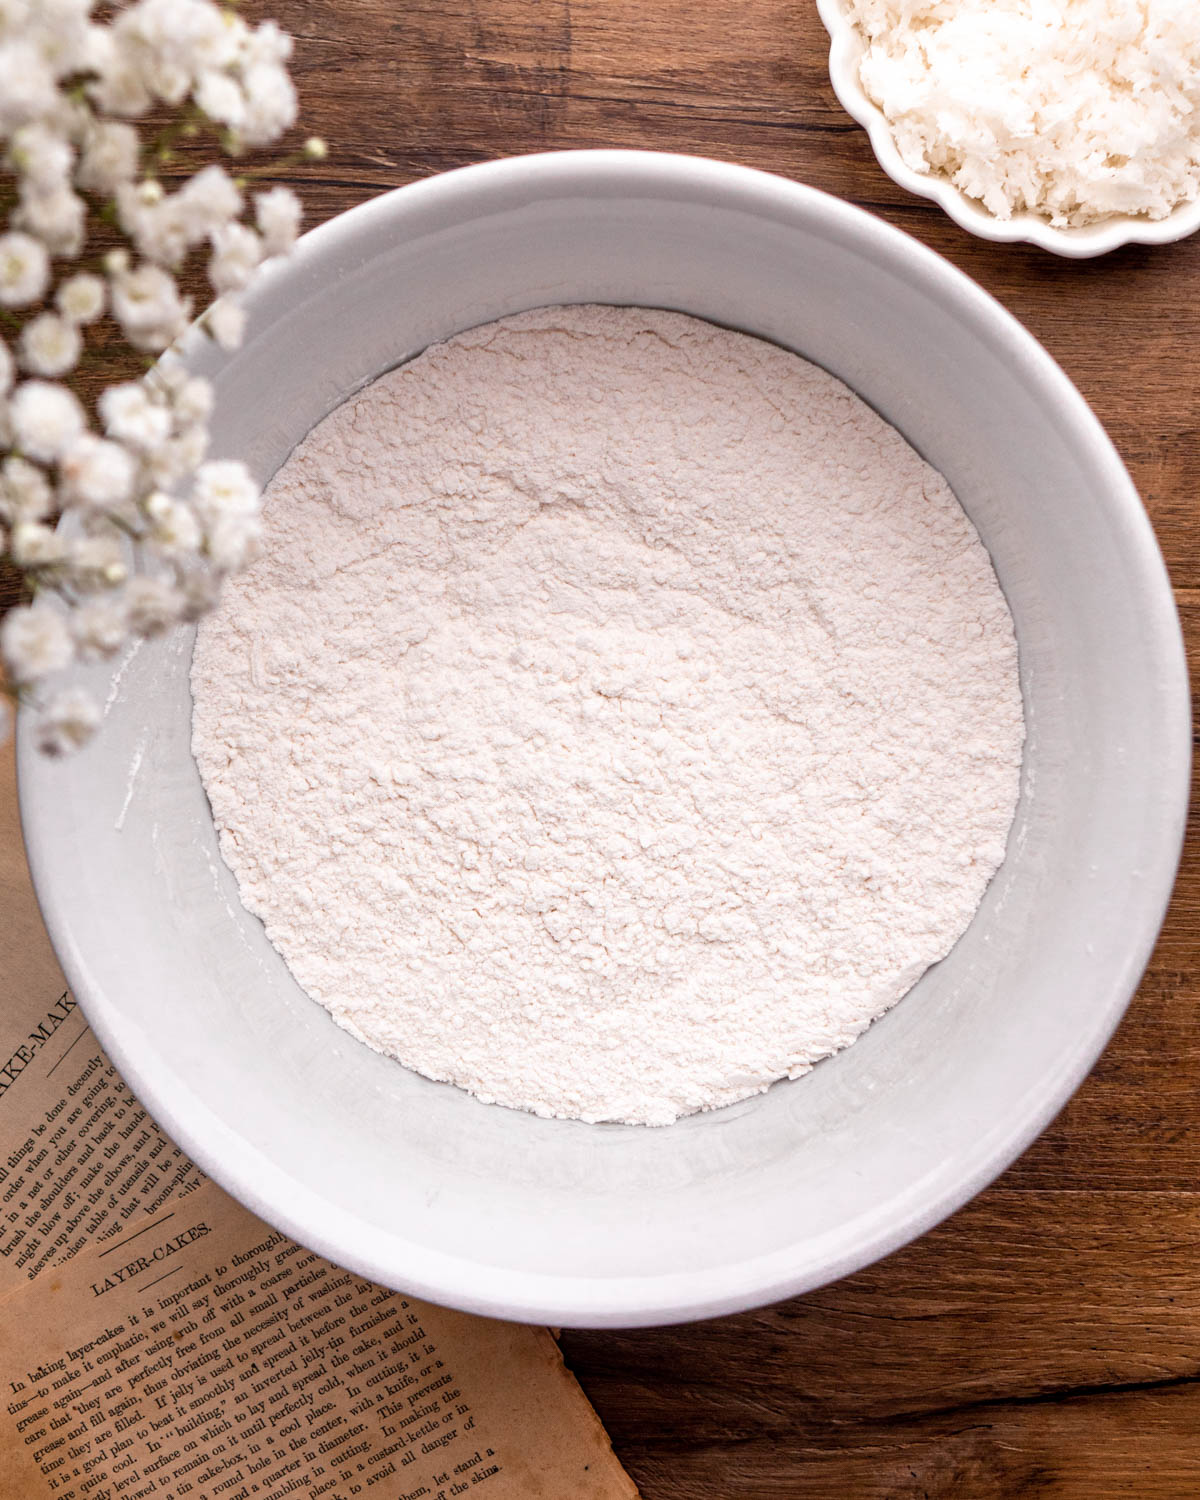 cake flour, baking powder, baking soda and salt whisked together in a white bowl on a wood board 